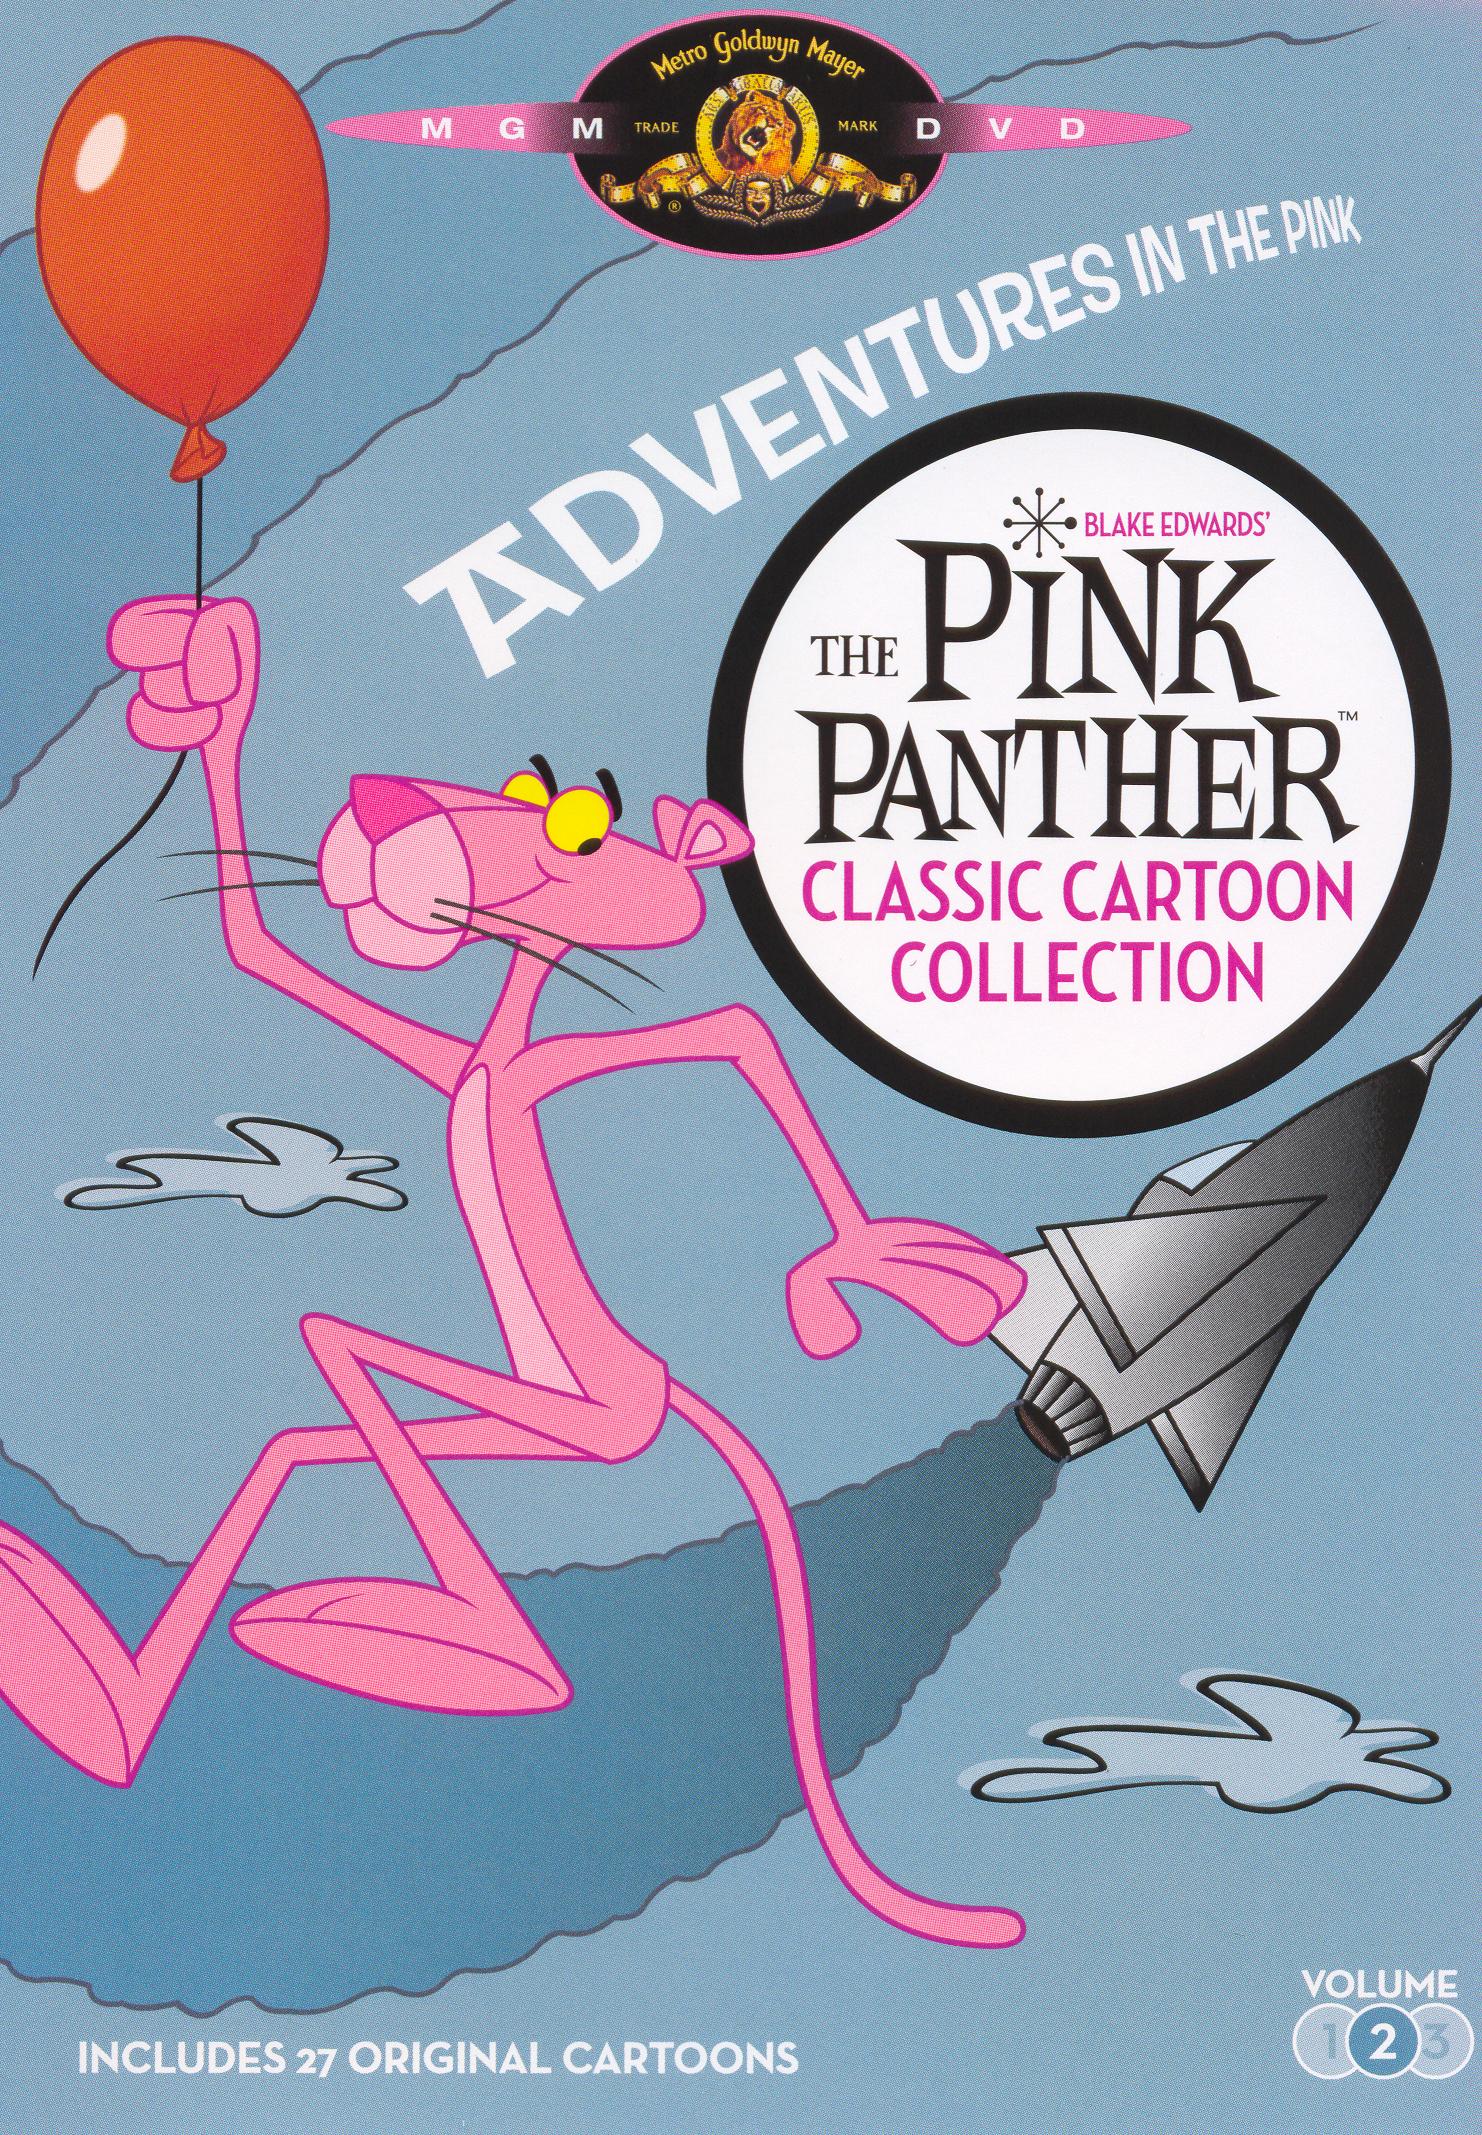 The Pink Panther Classic Cartoon Collection, Vol. 3: Frolics in the Pink  DVD for Sale in Chino, CA - OfferUp